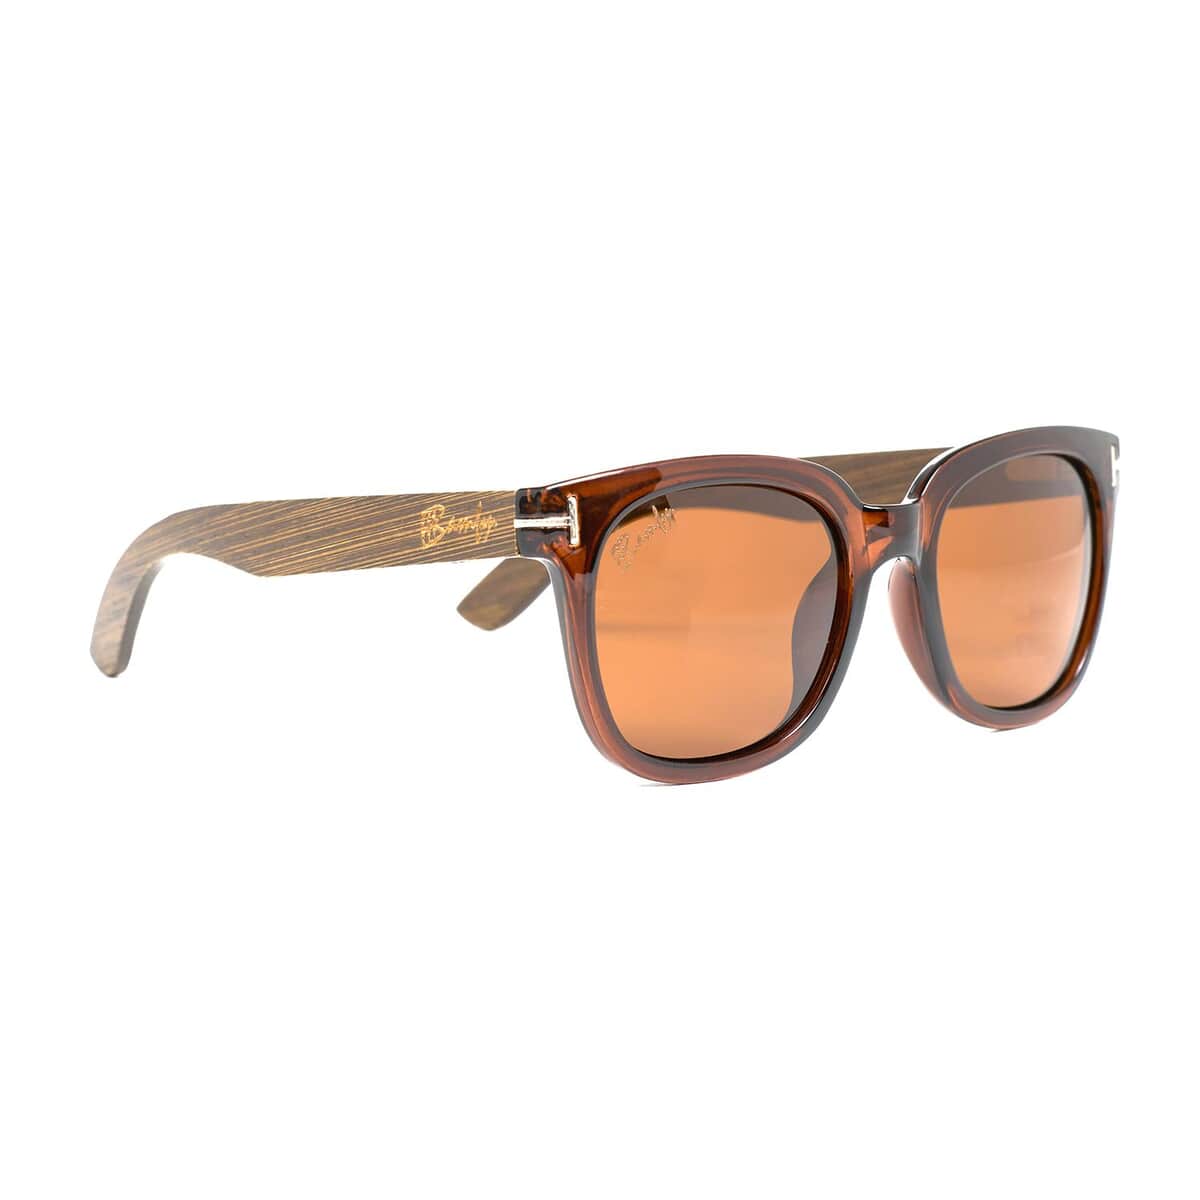 Bamfy Linda Vista UV400 Sunglasses with Bamboo Legs and Case -Brownout image number 3